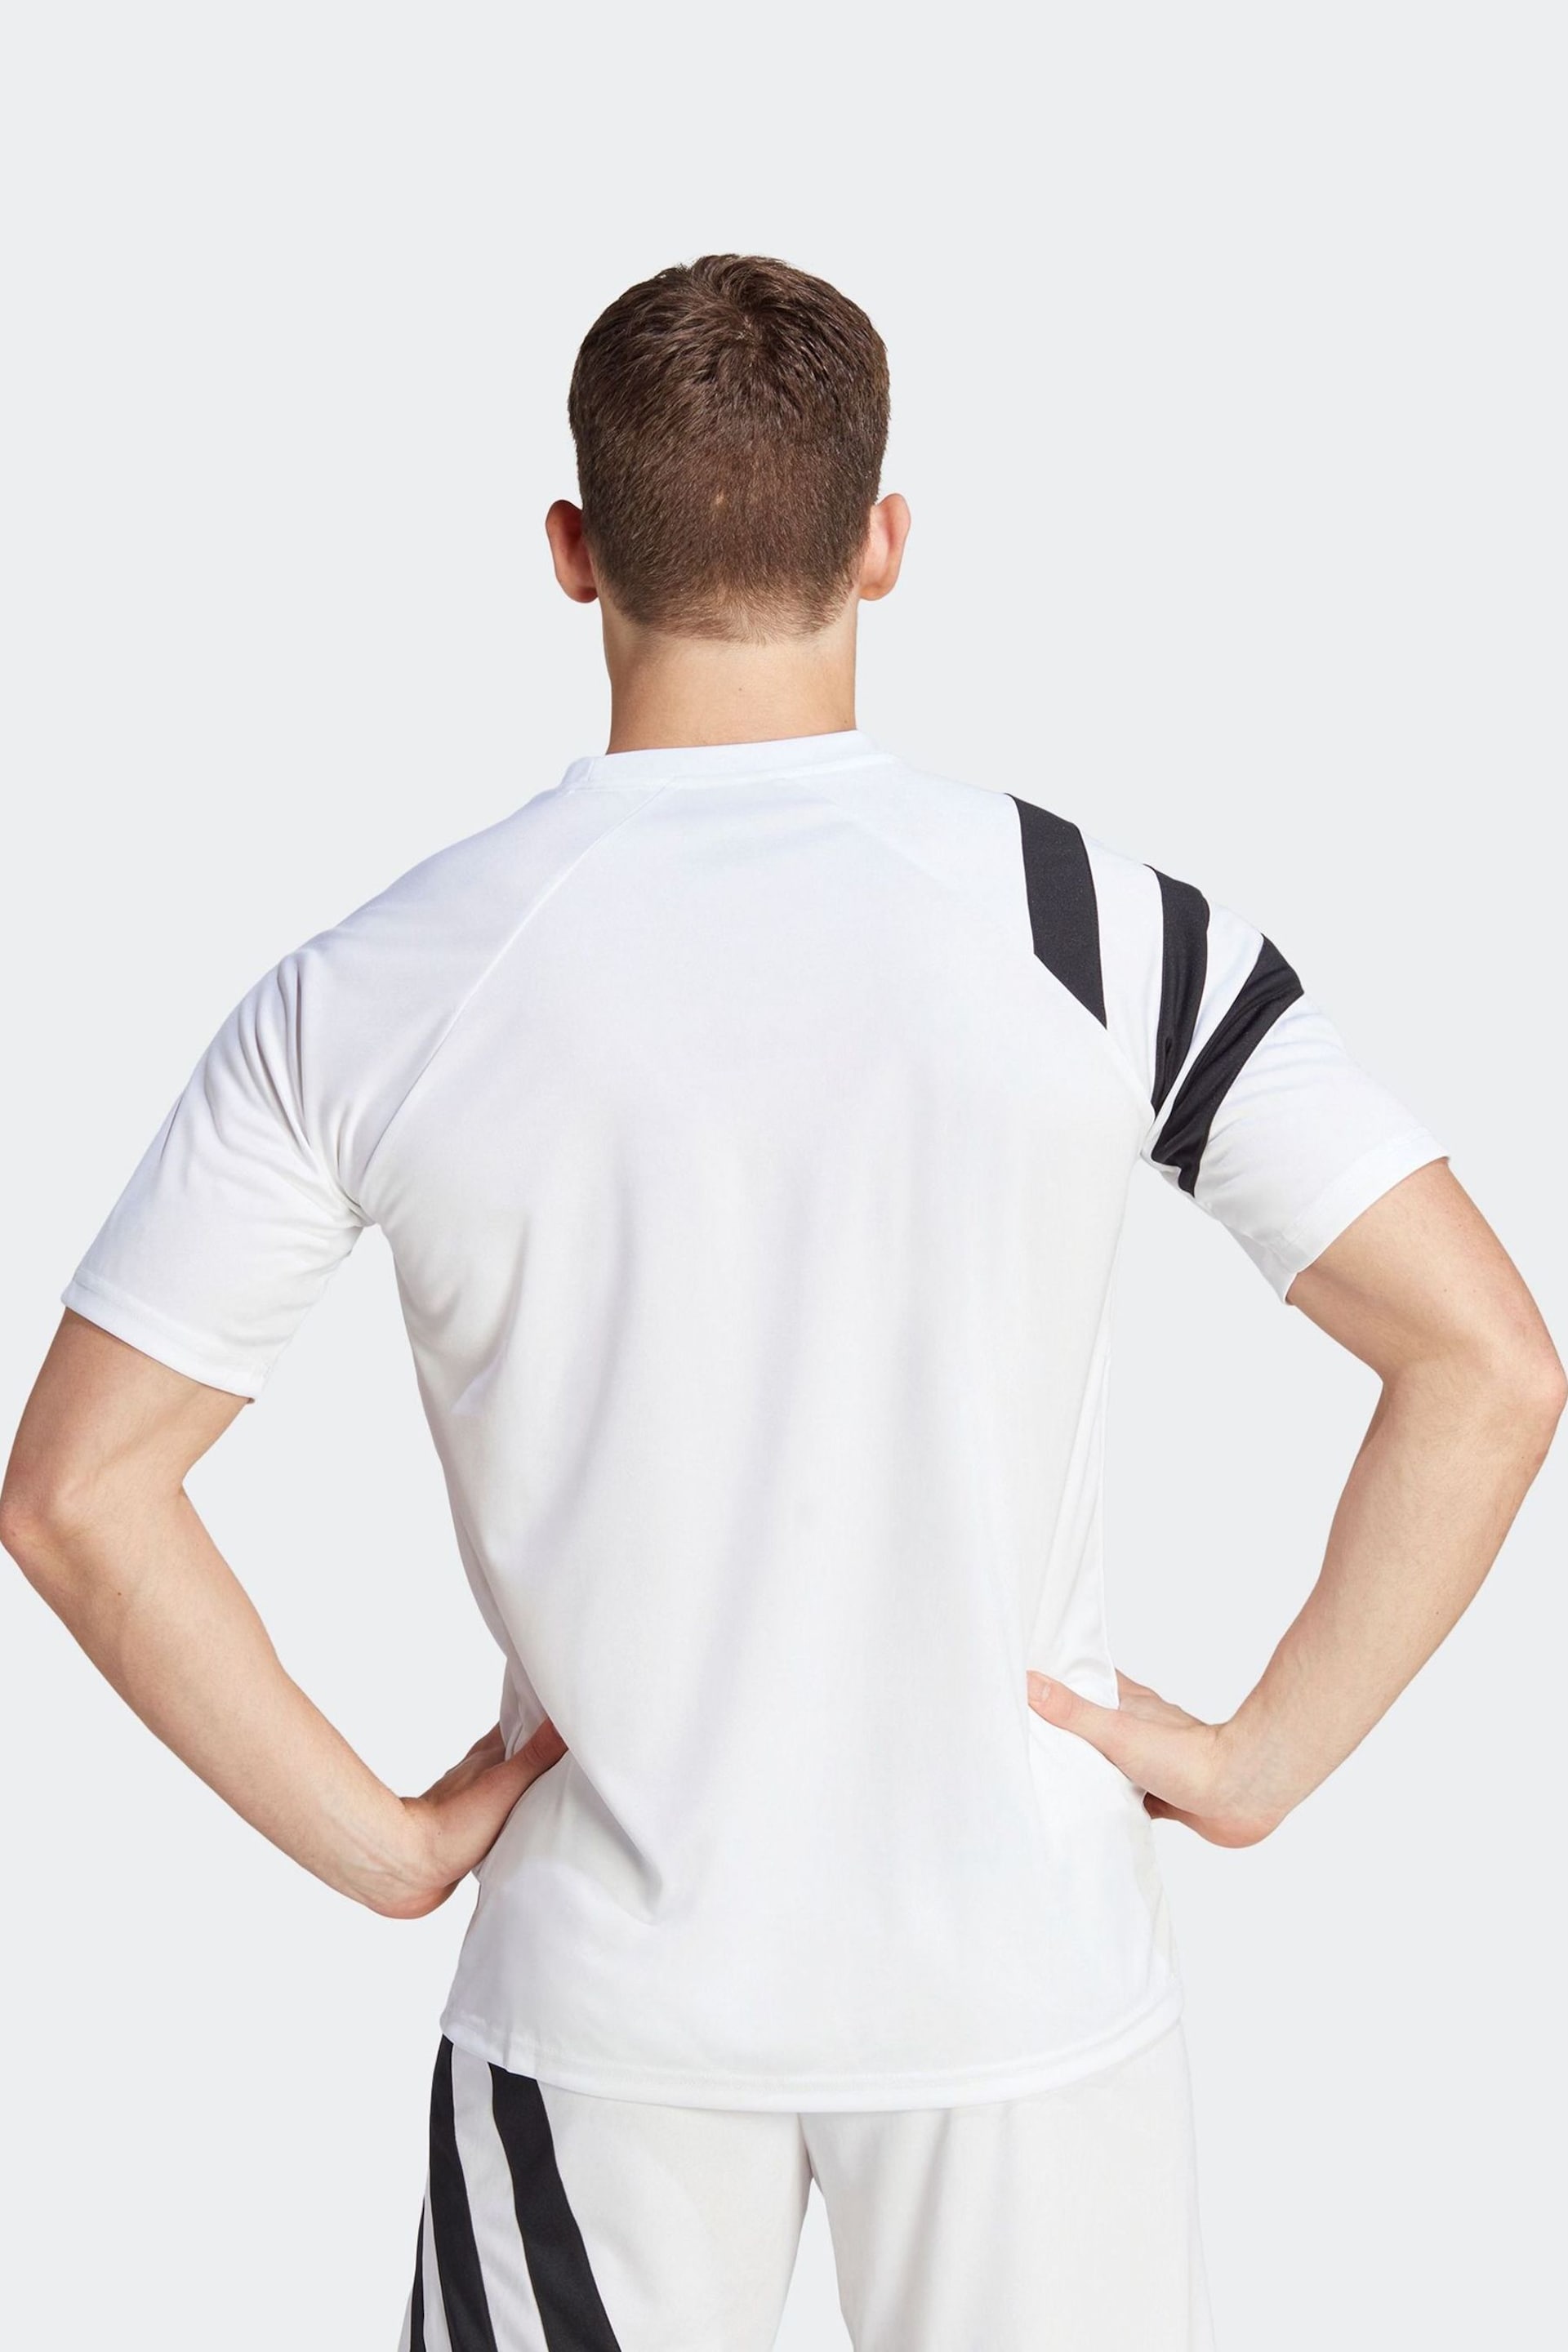 adidas White Fortore 23 Jersey - Image 2 of 8